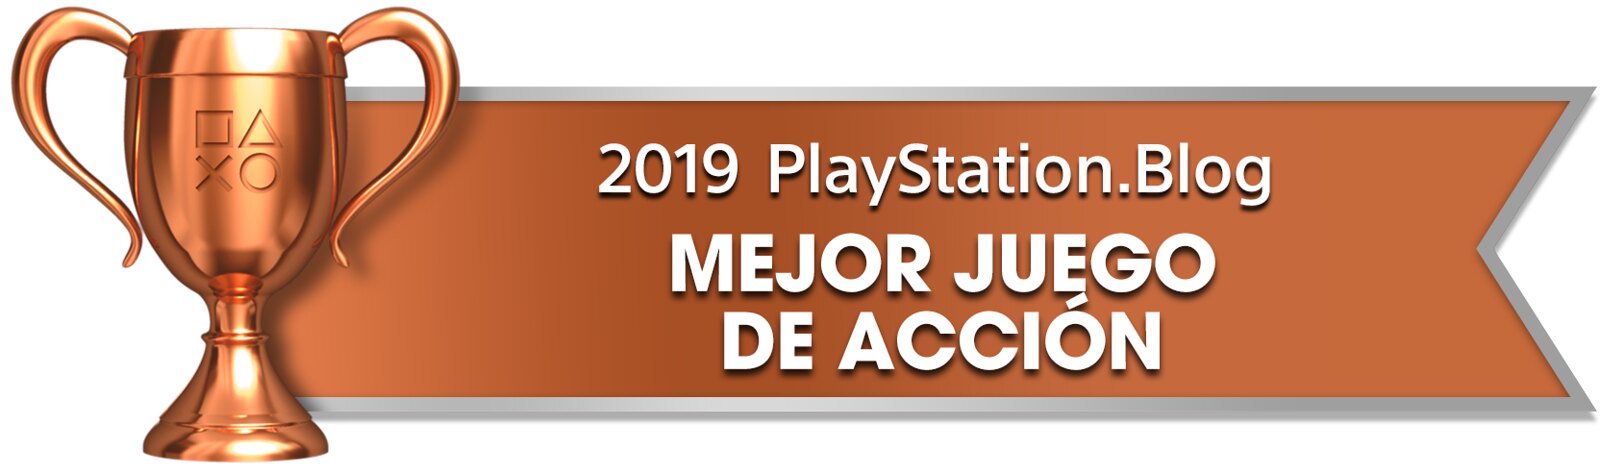 PS Blog Game of the Year 2019 - Best Action Game - 4 - Bronze